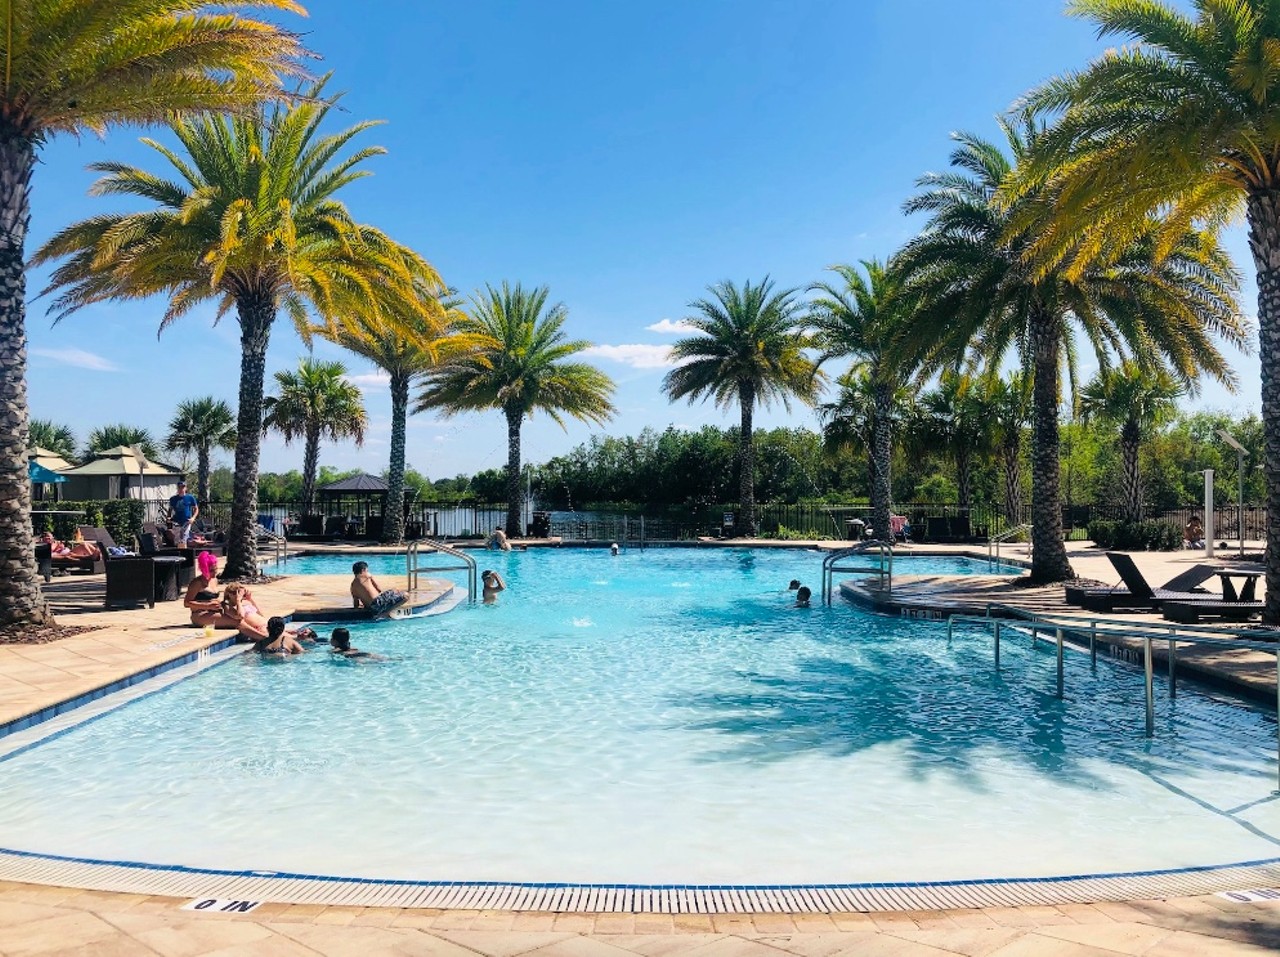 Balmoral Resort Florida
124 Kenny Blvd., Haines City
Price: Starts at $15
Balmoral Resort offers plenty of family-friendly amenities and poolside activities. There’s putt-putt golf, an arcade and bar and grill in addition to the sprawling swimming pool and lounging areas.